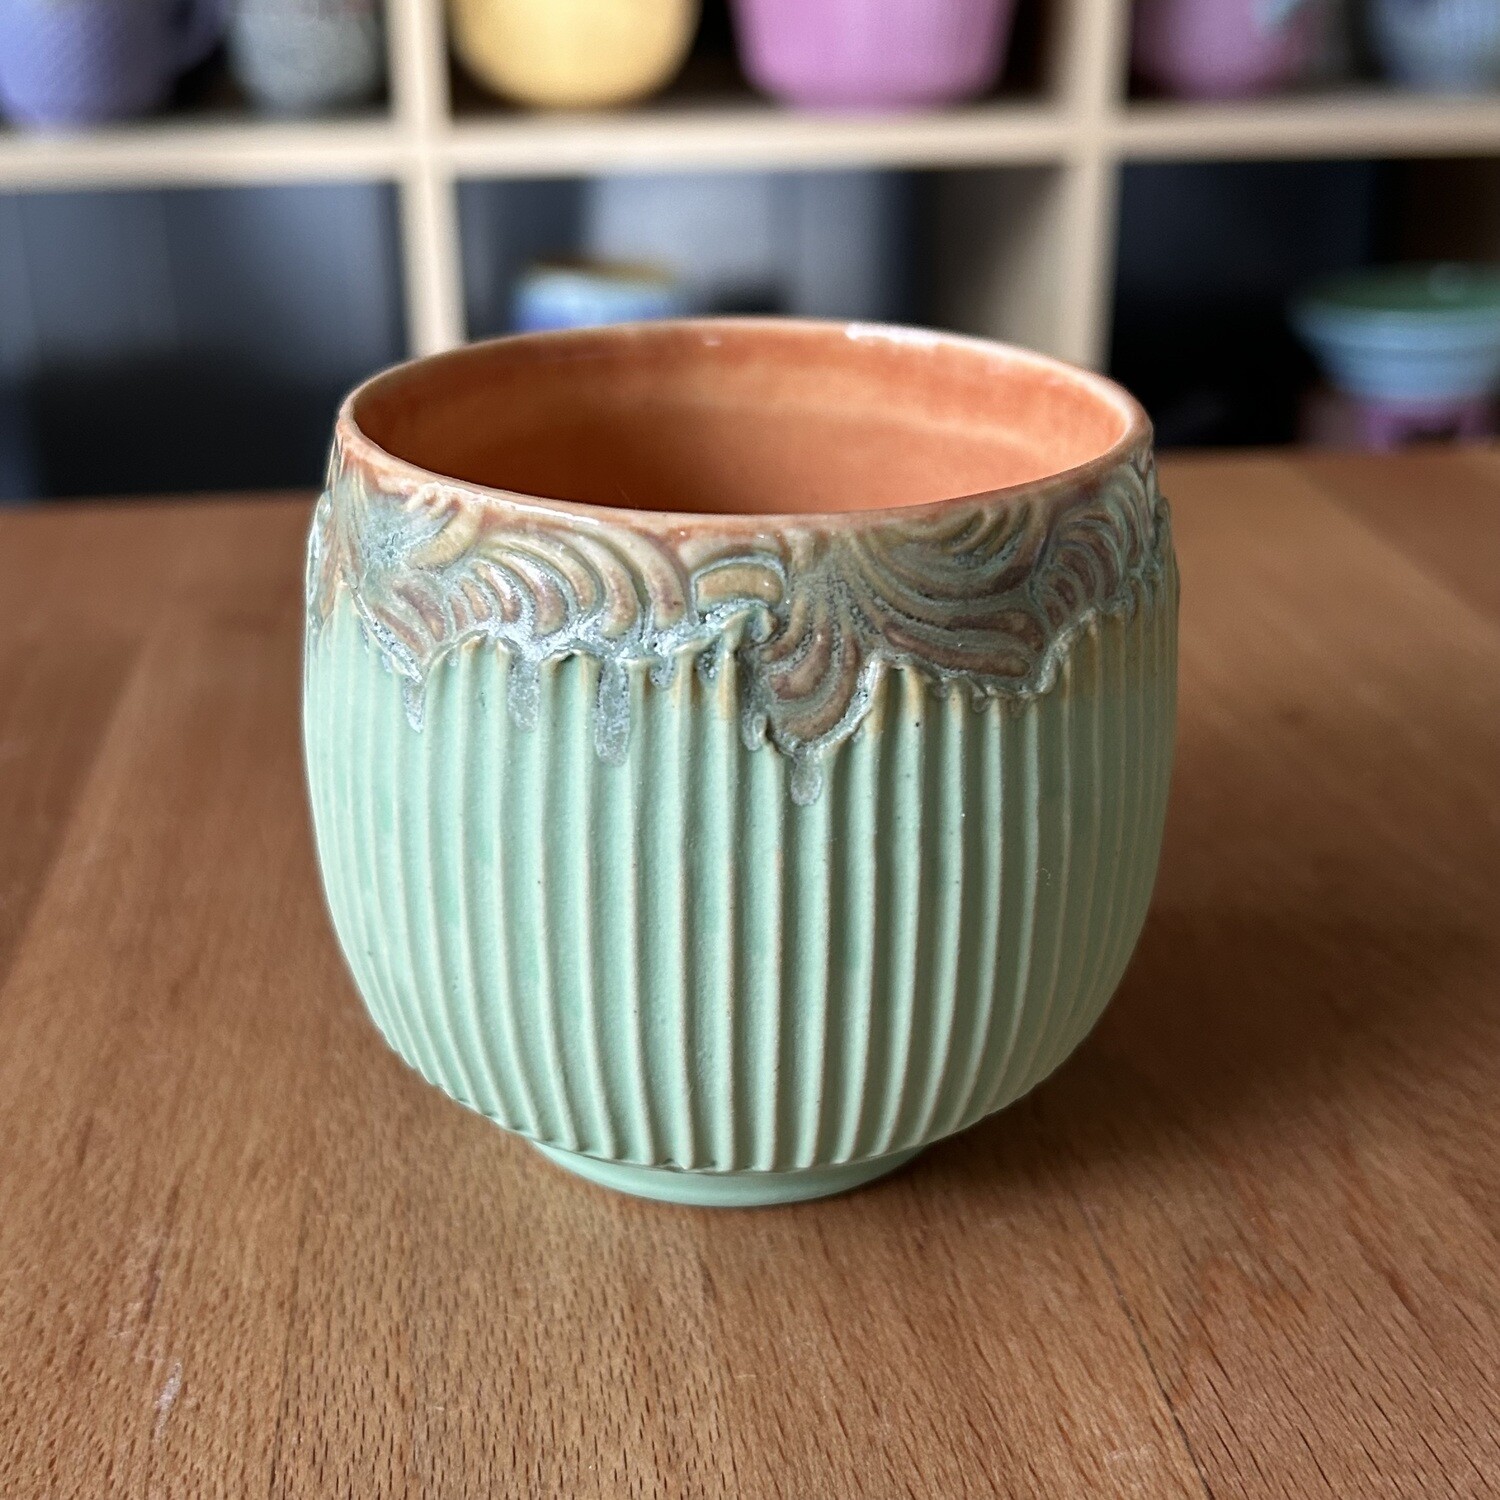 5oz Espresso Cup/Tiny Bowl in peach, watered twilight &amp; green